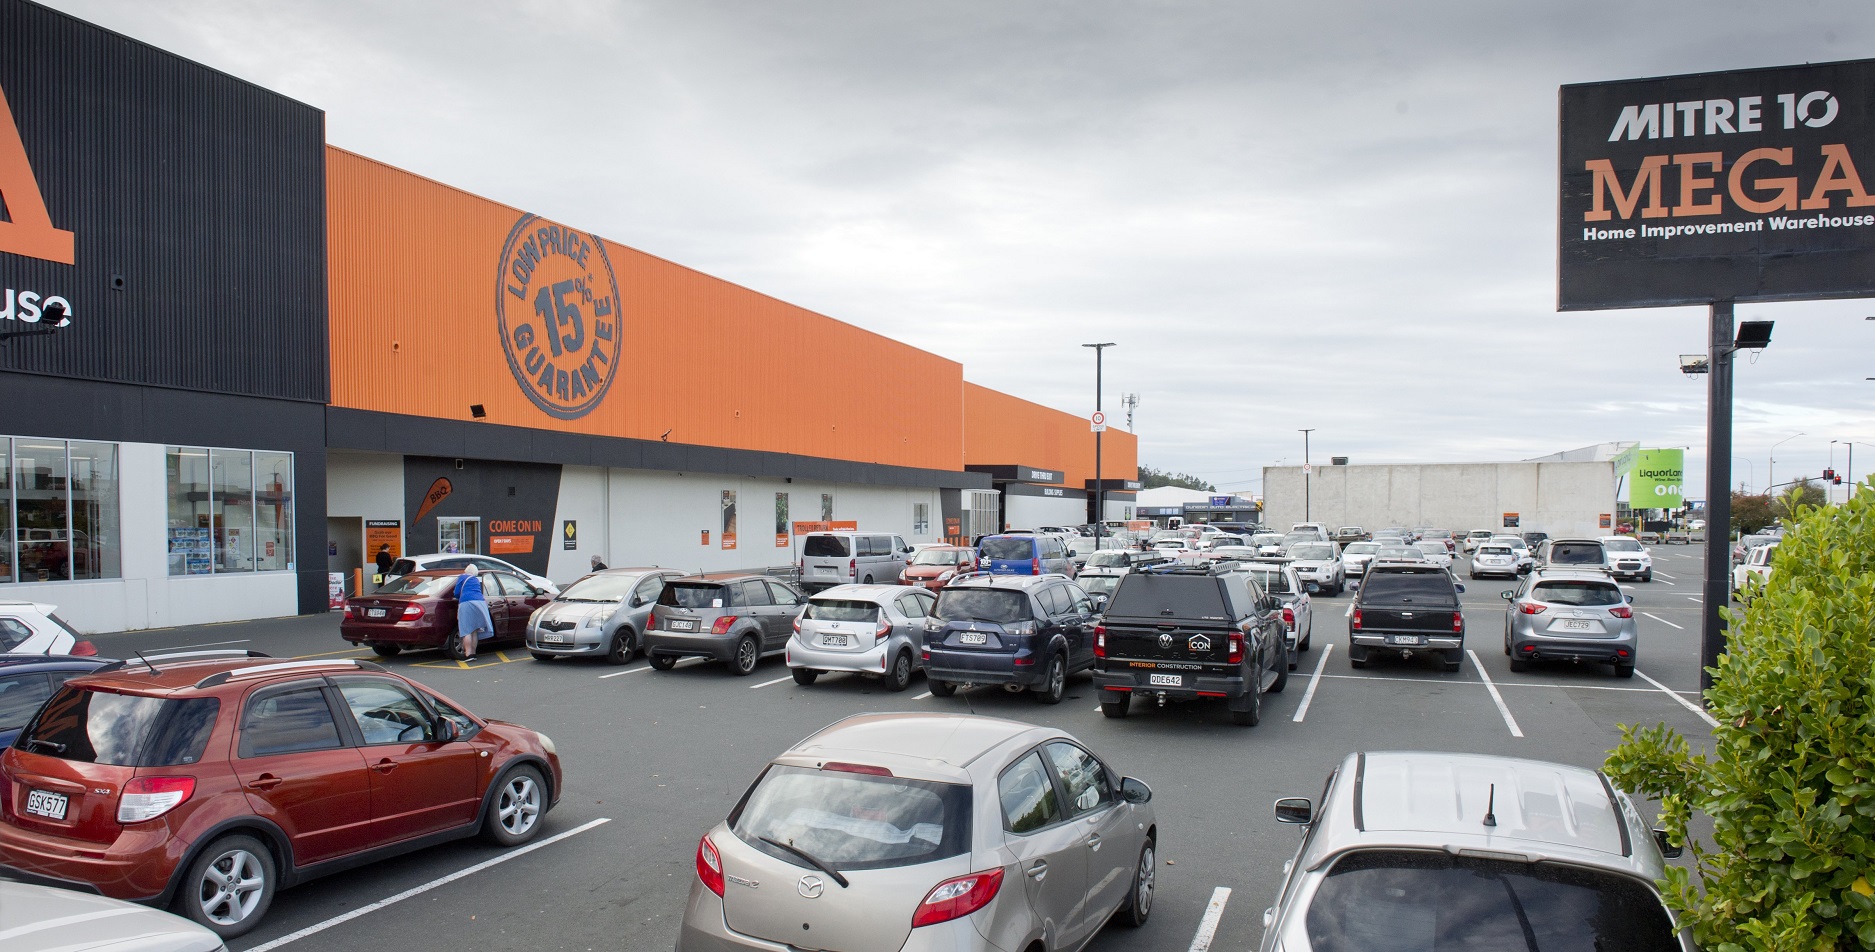 Otago Land Group Ltd has been granted consent for a two-storey parking building over part of the...